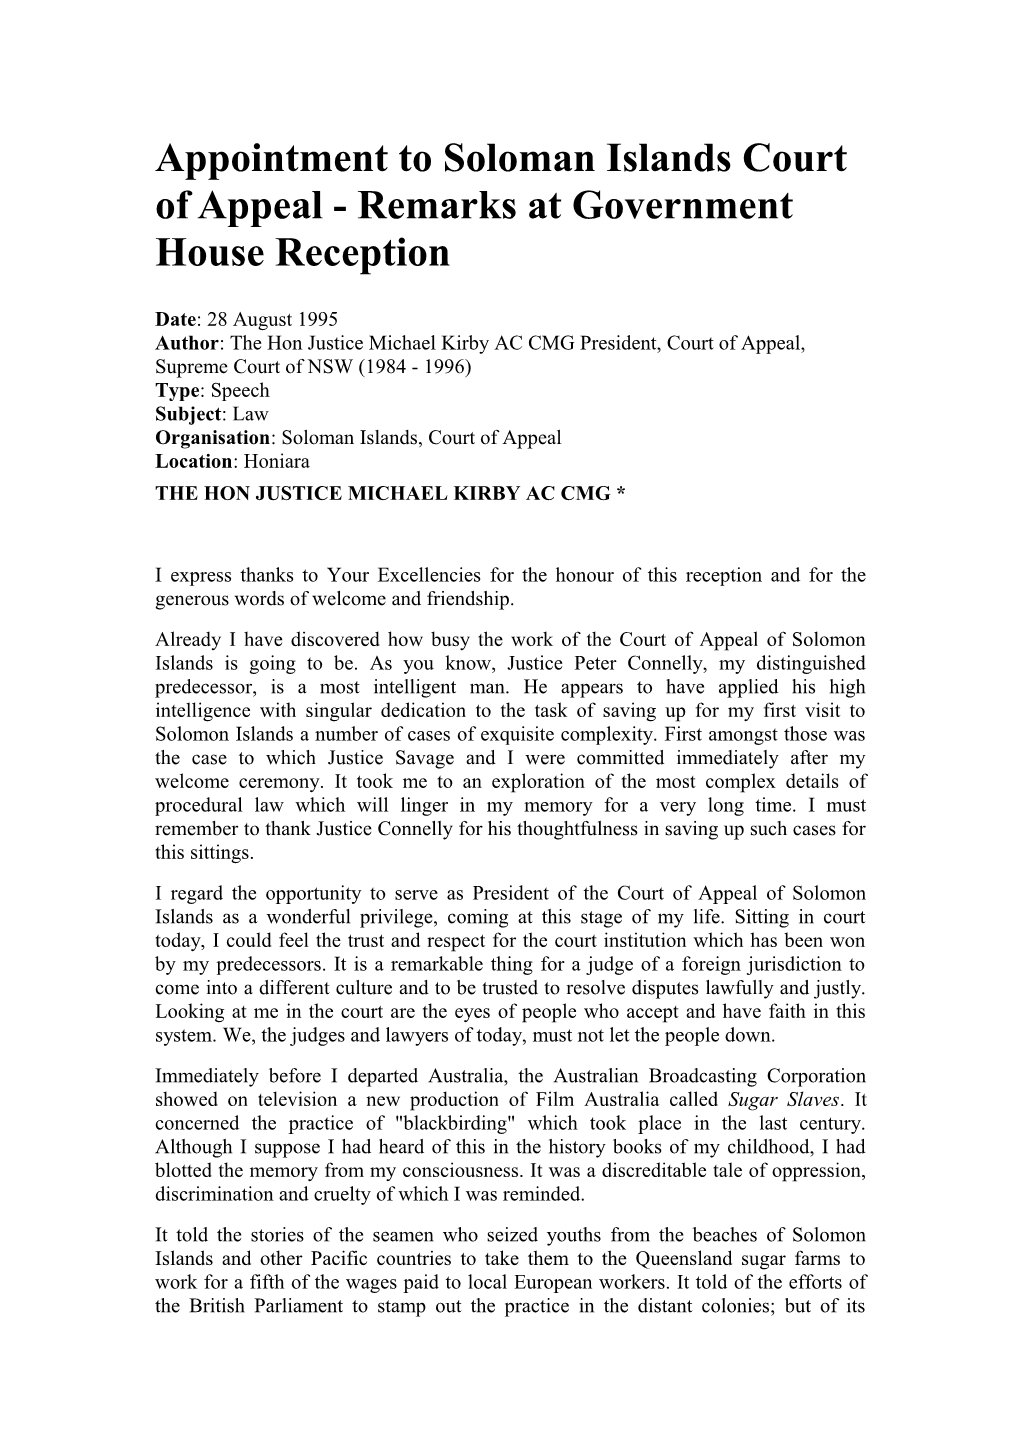 Appointment to Soloman Islands Court of Appeal - Remarks at Government House Reception